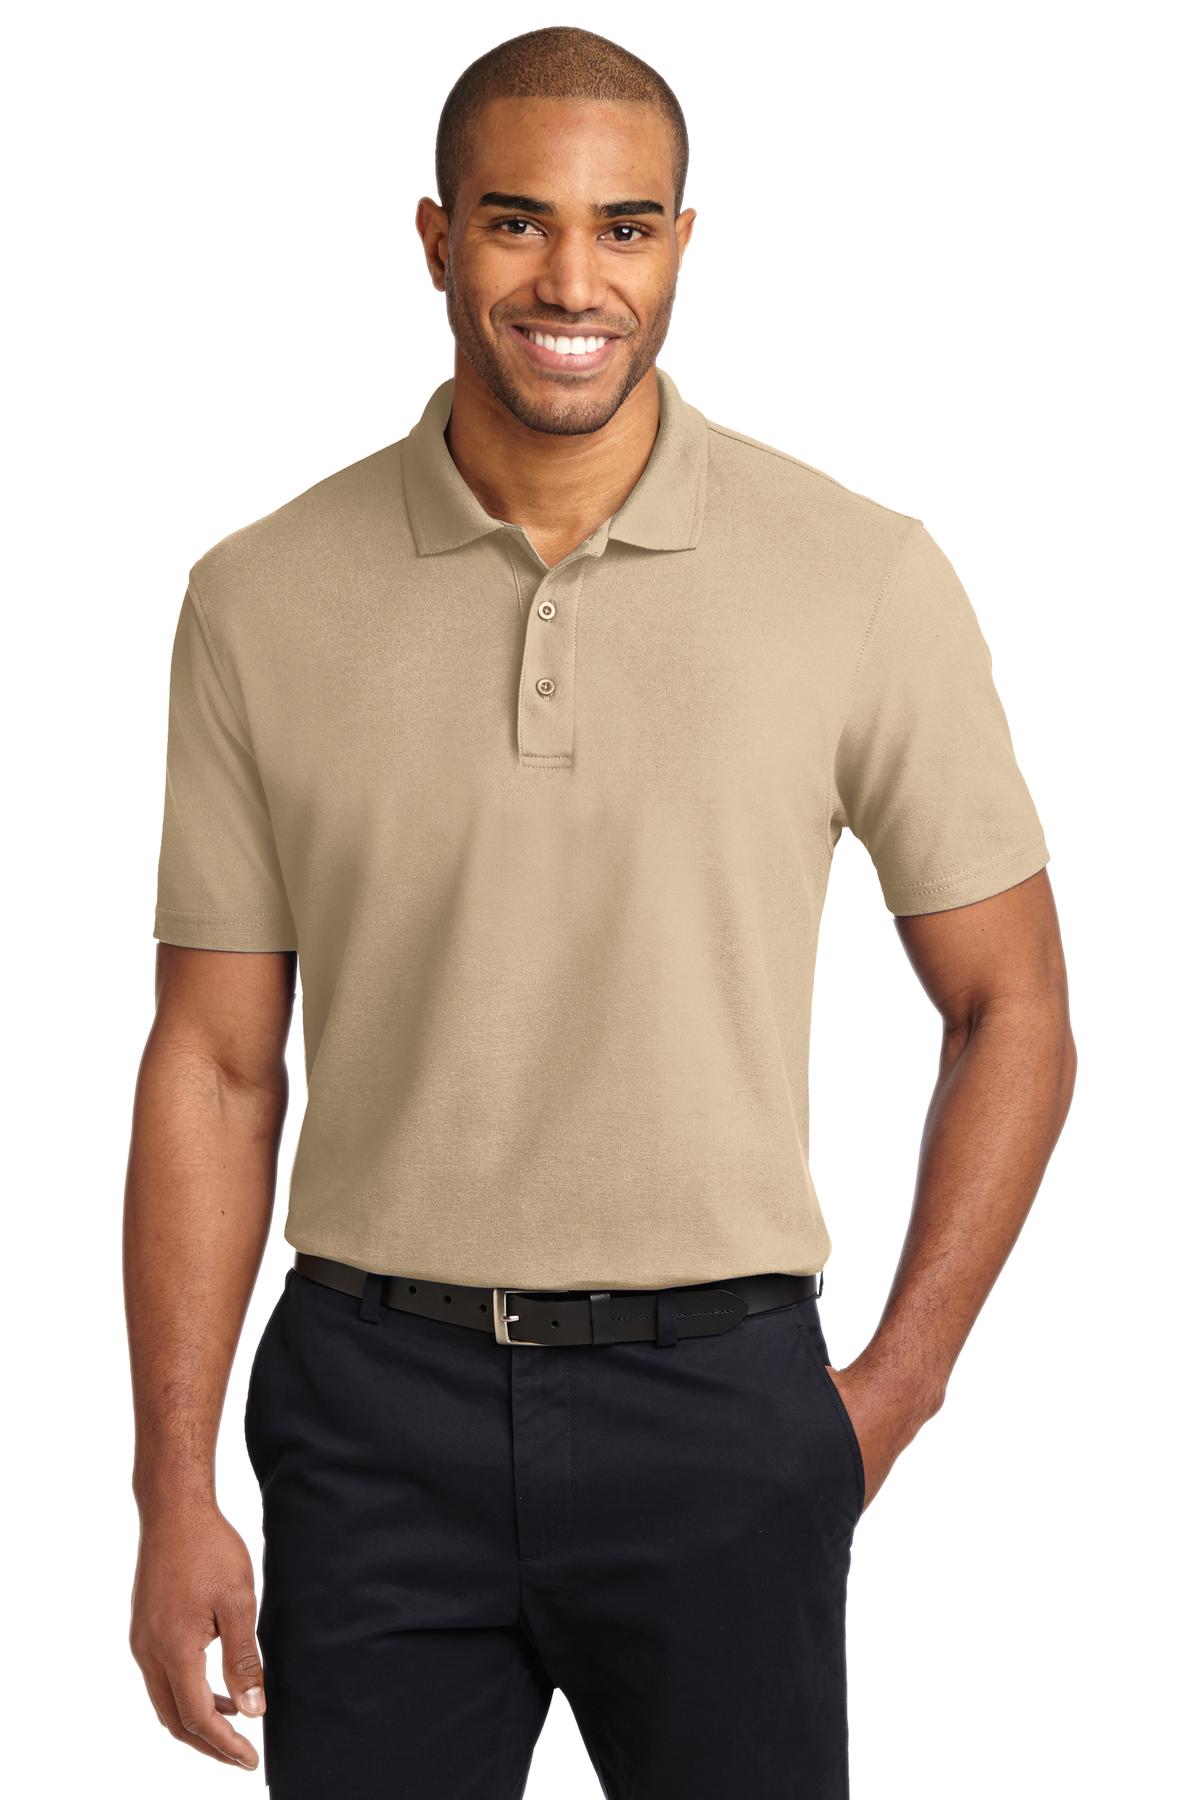 Port Authority Tall Stain-Resistant Polo. TLK510